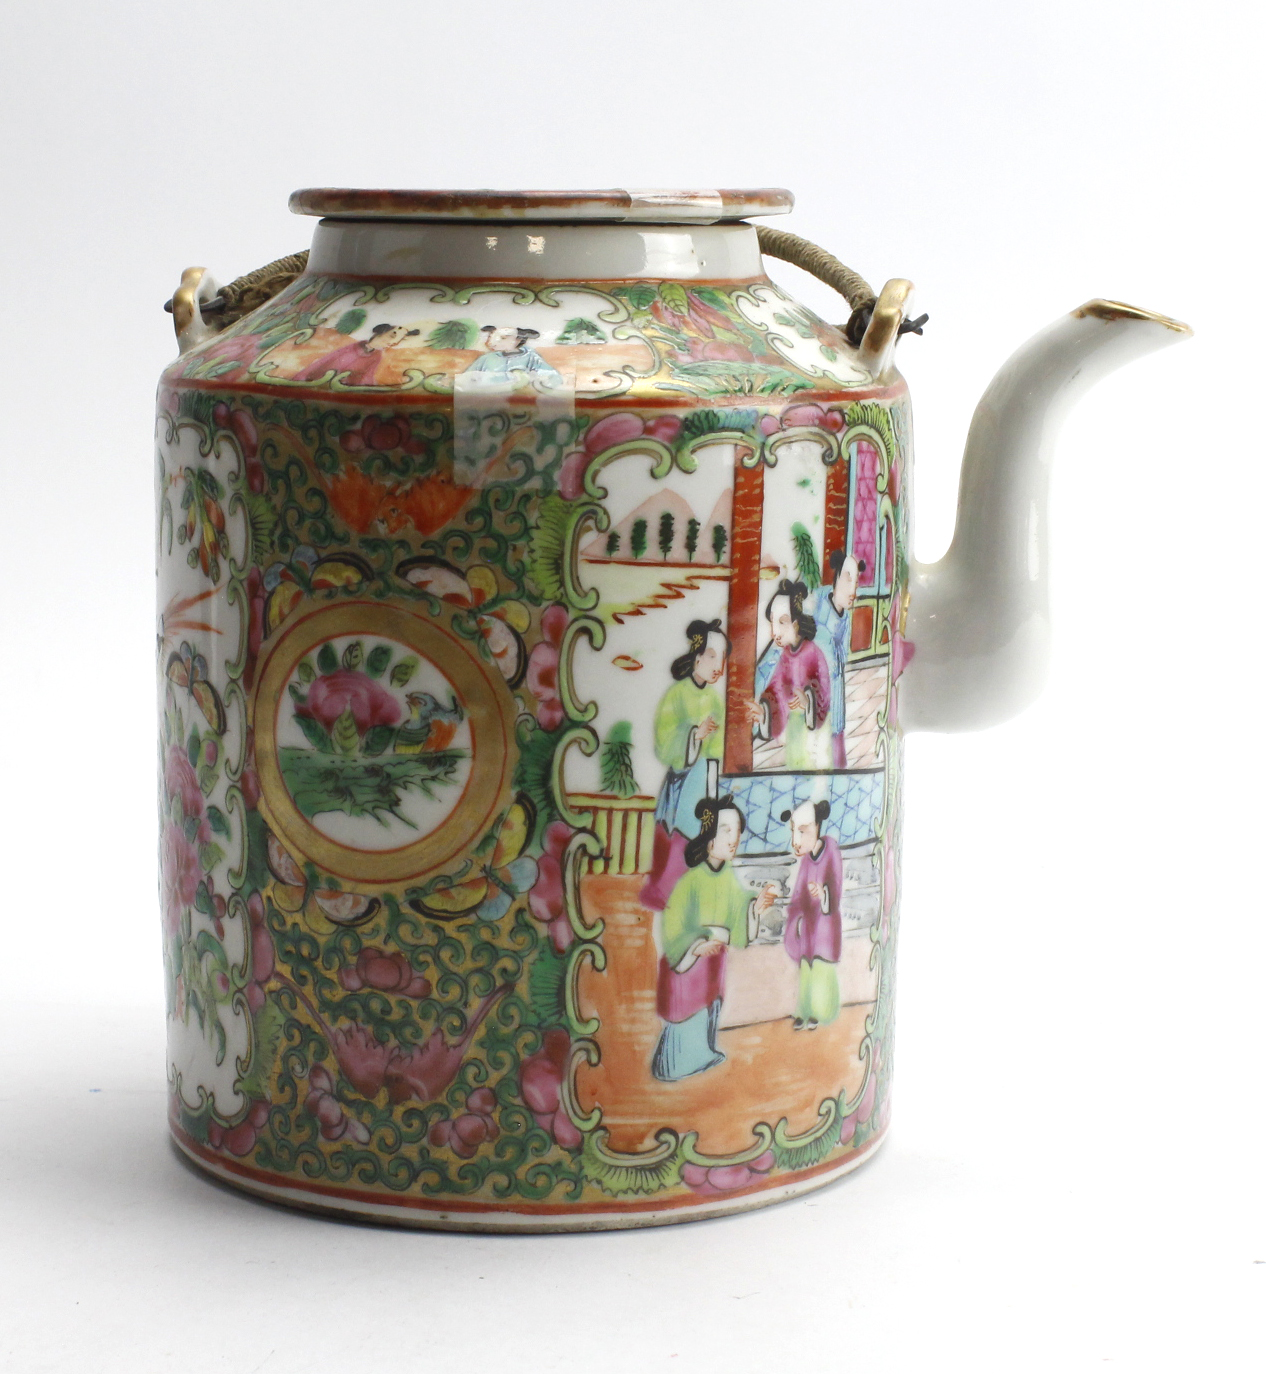 Chinese Famille Rose teapot, circa 19th Century, with figural and floral decoration, height 16.5cm